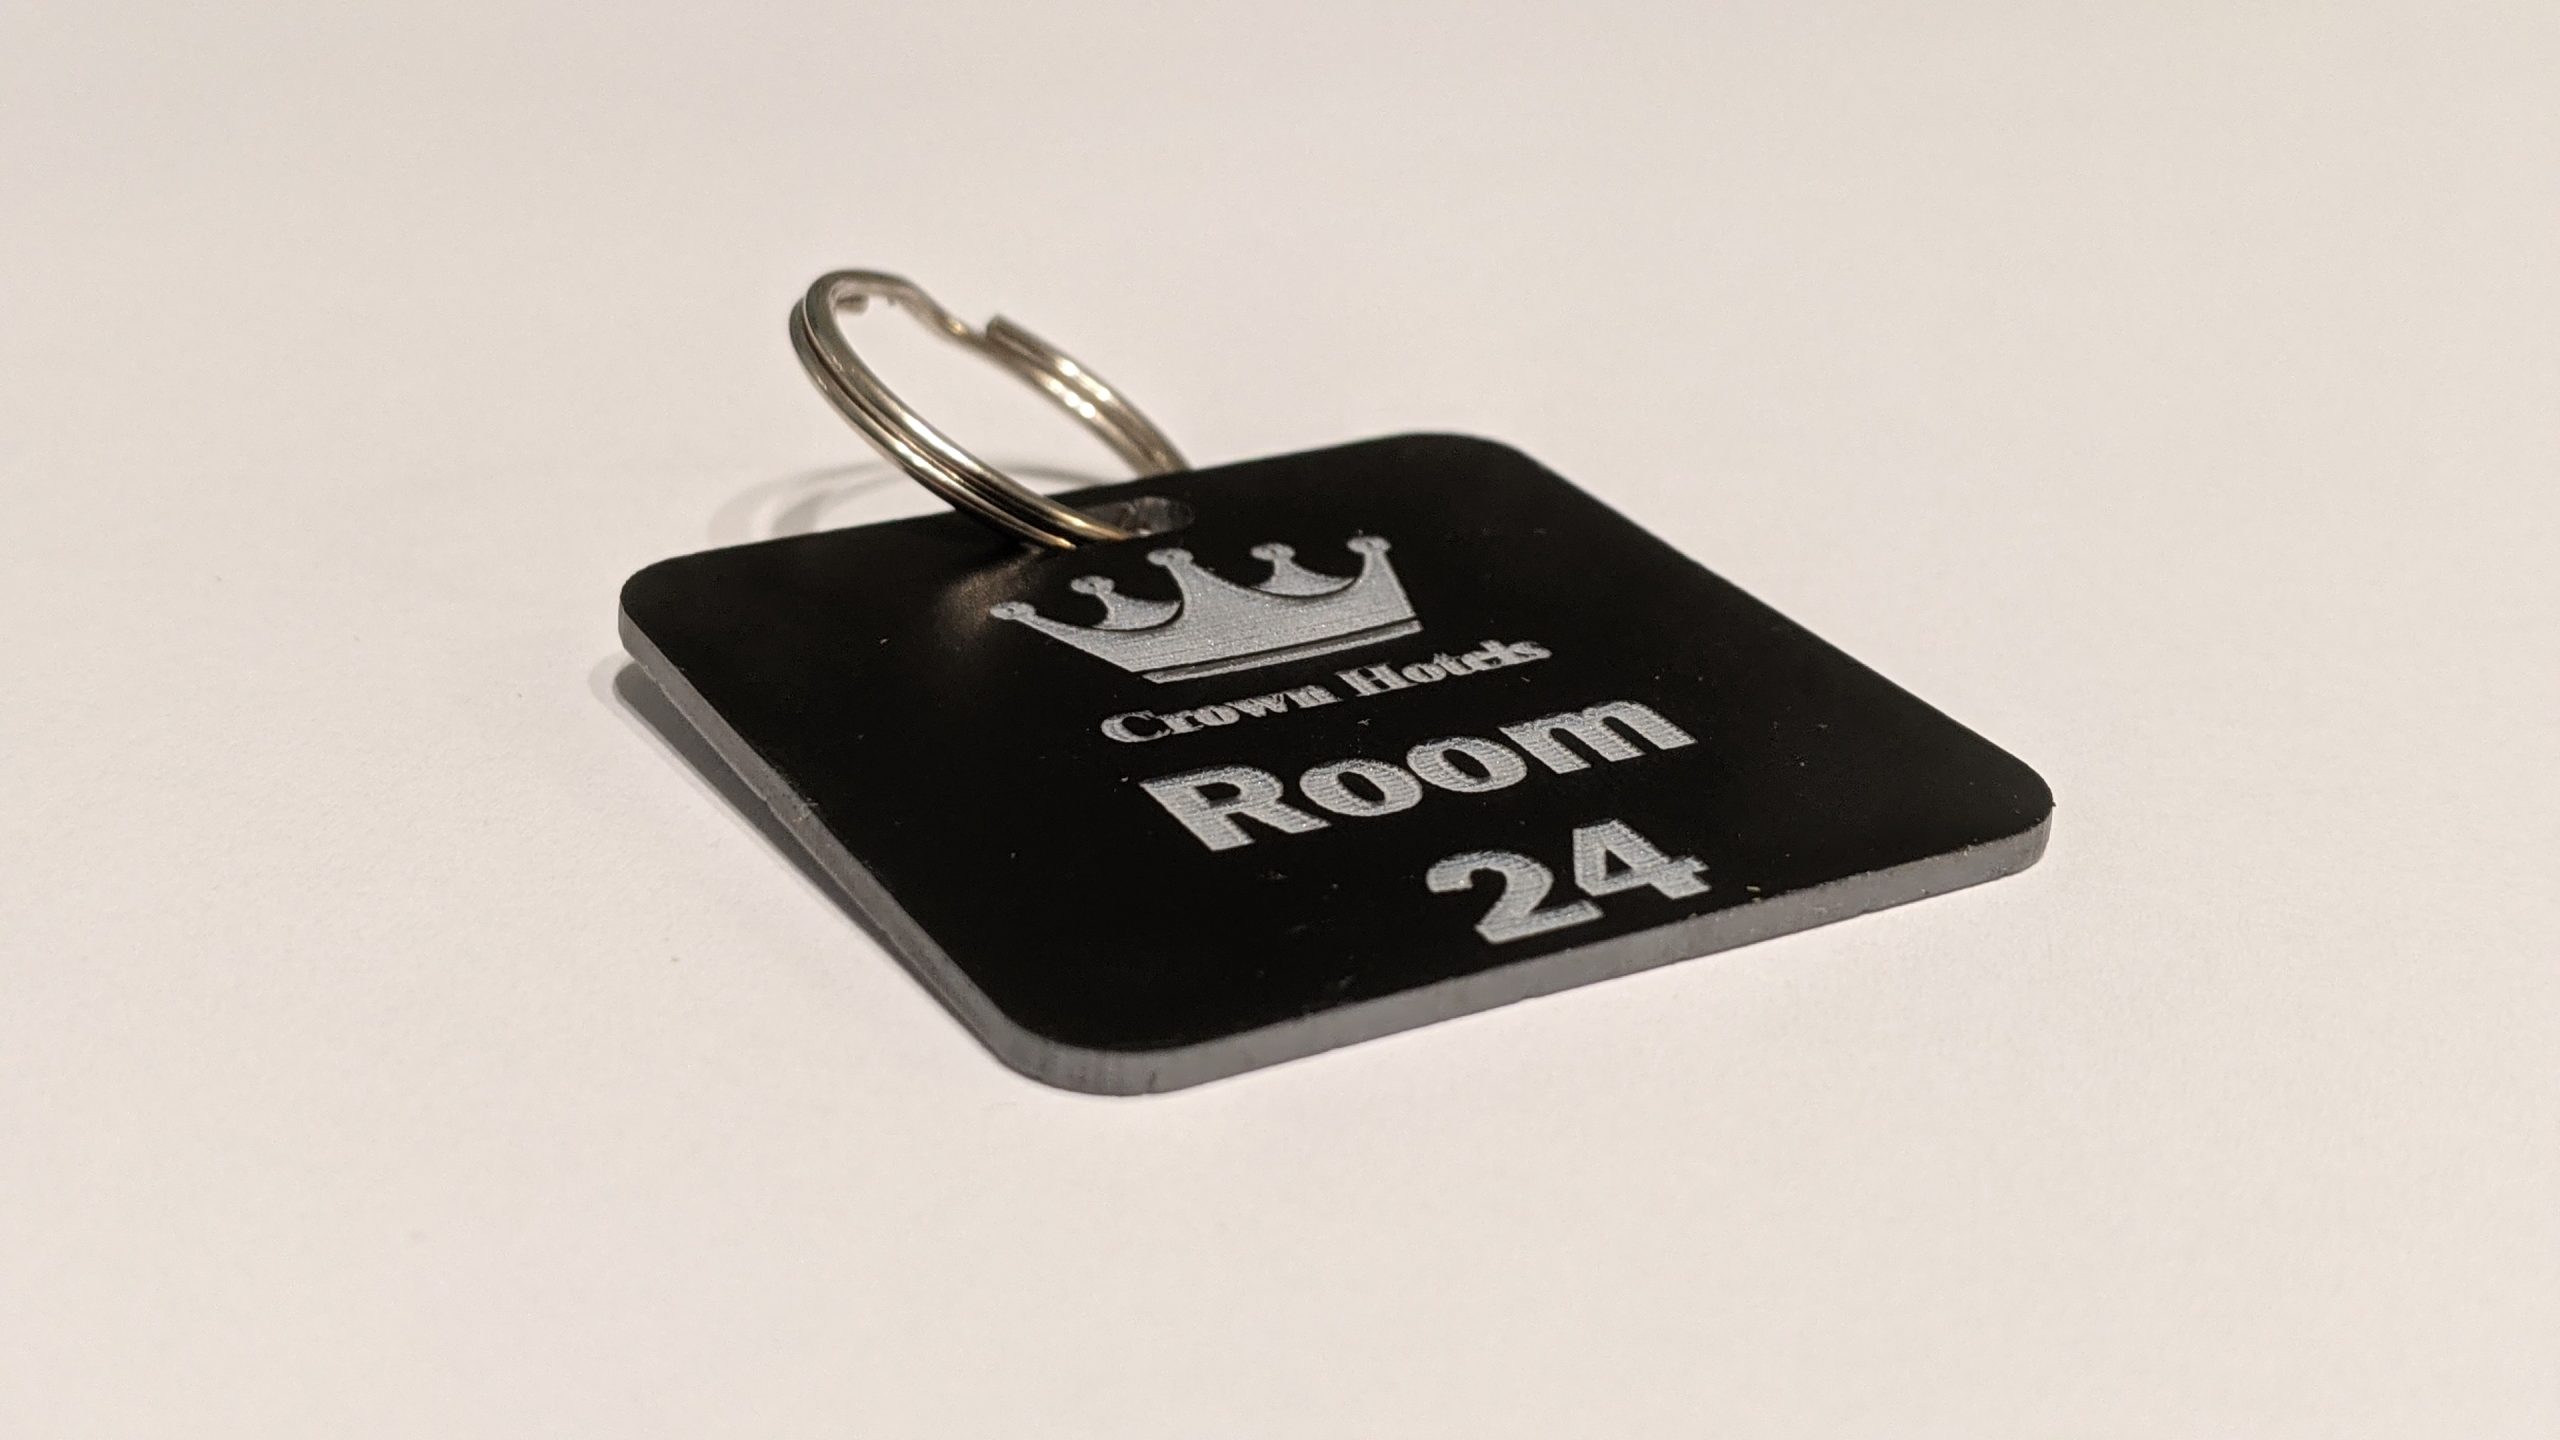 Black keyring with white text showing a crown logo and a door number